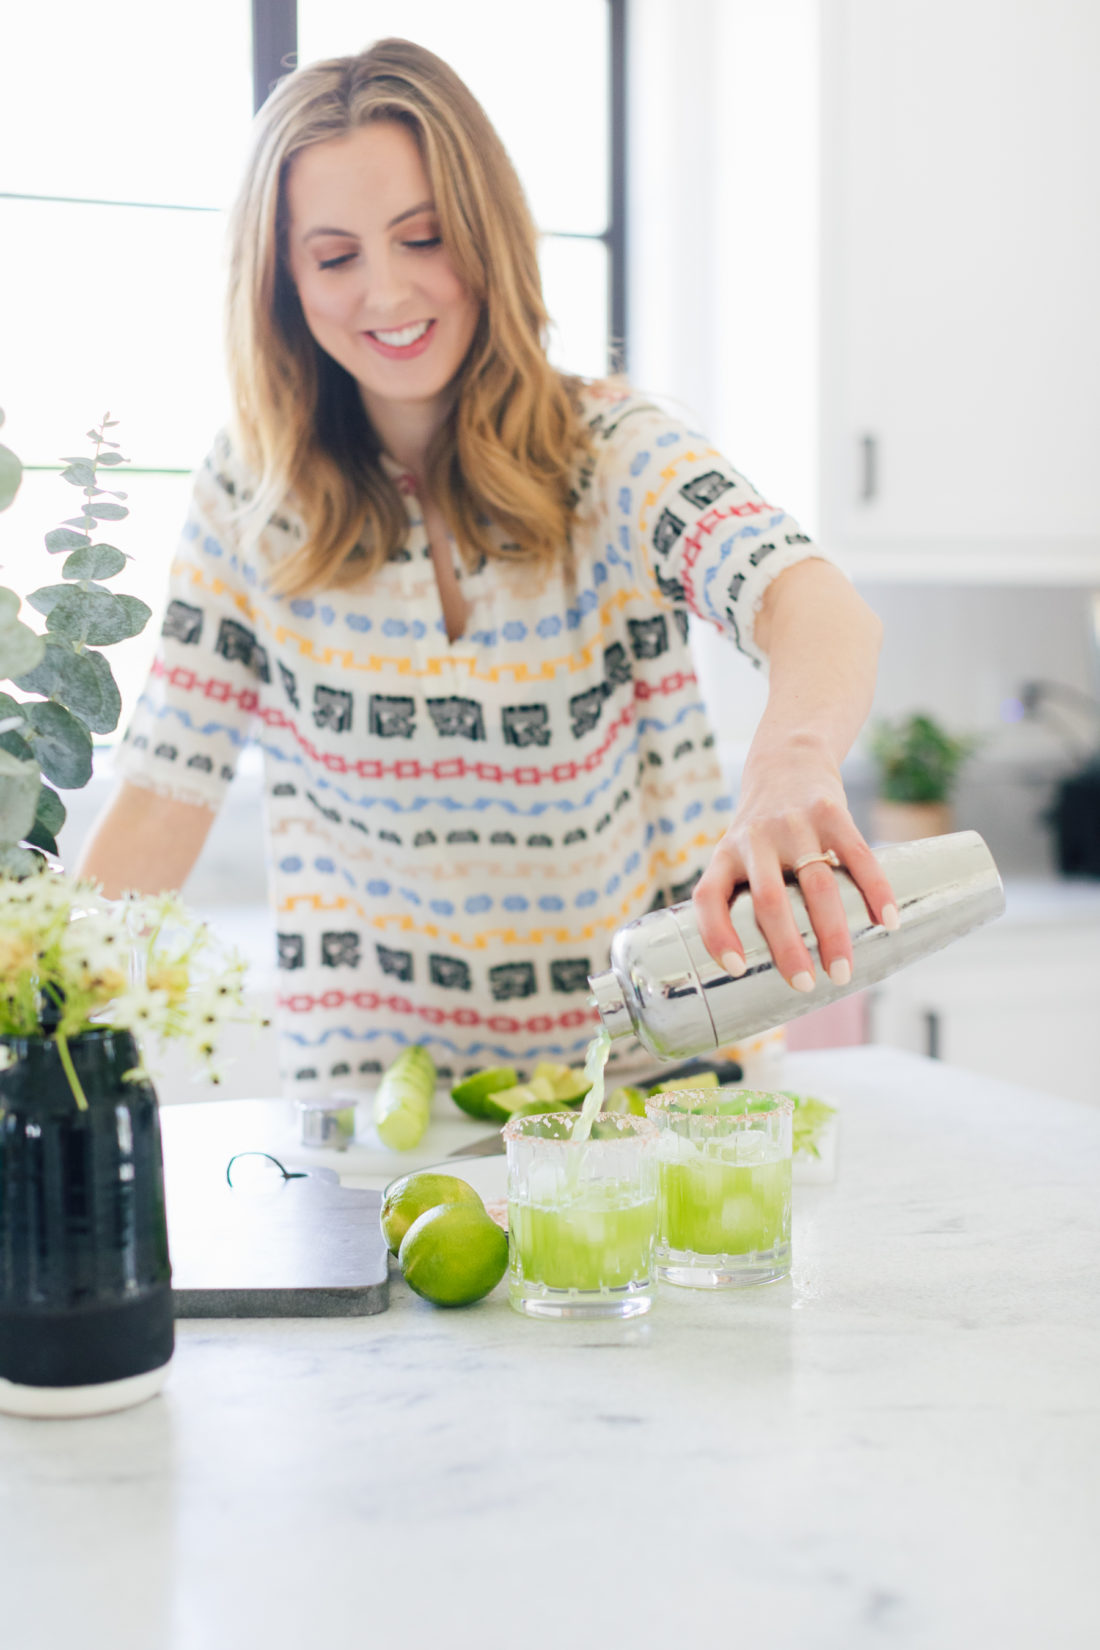 Eva Amurri Martino of Happily Eva After pours cucumber margaritas into a glass at her home in Connecticut